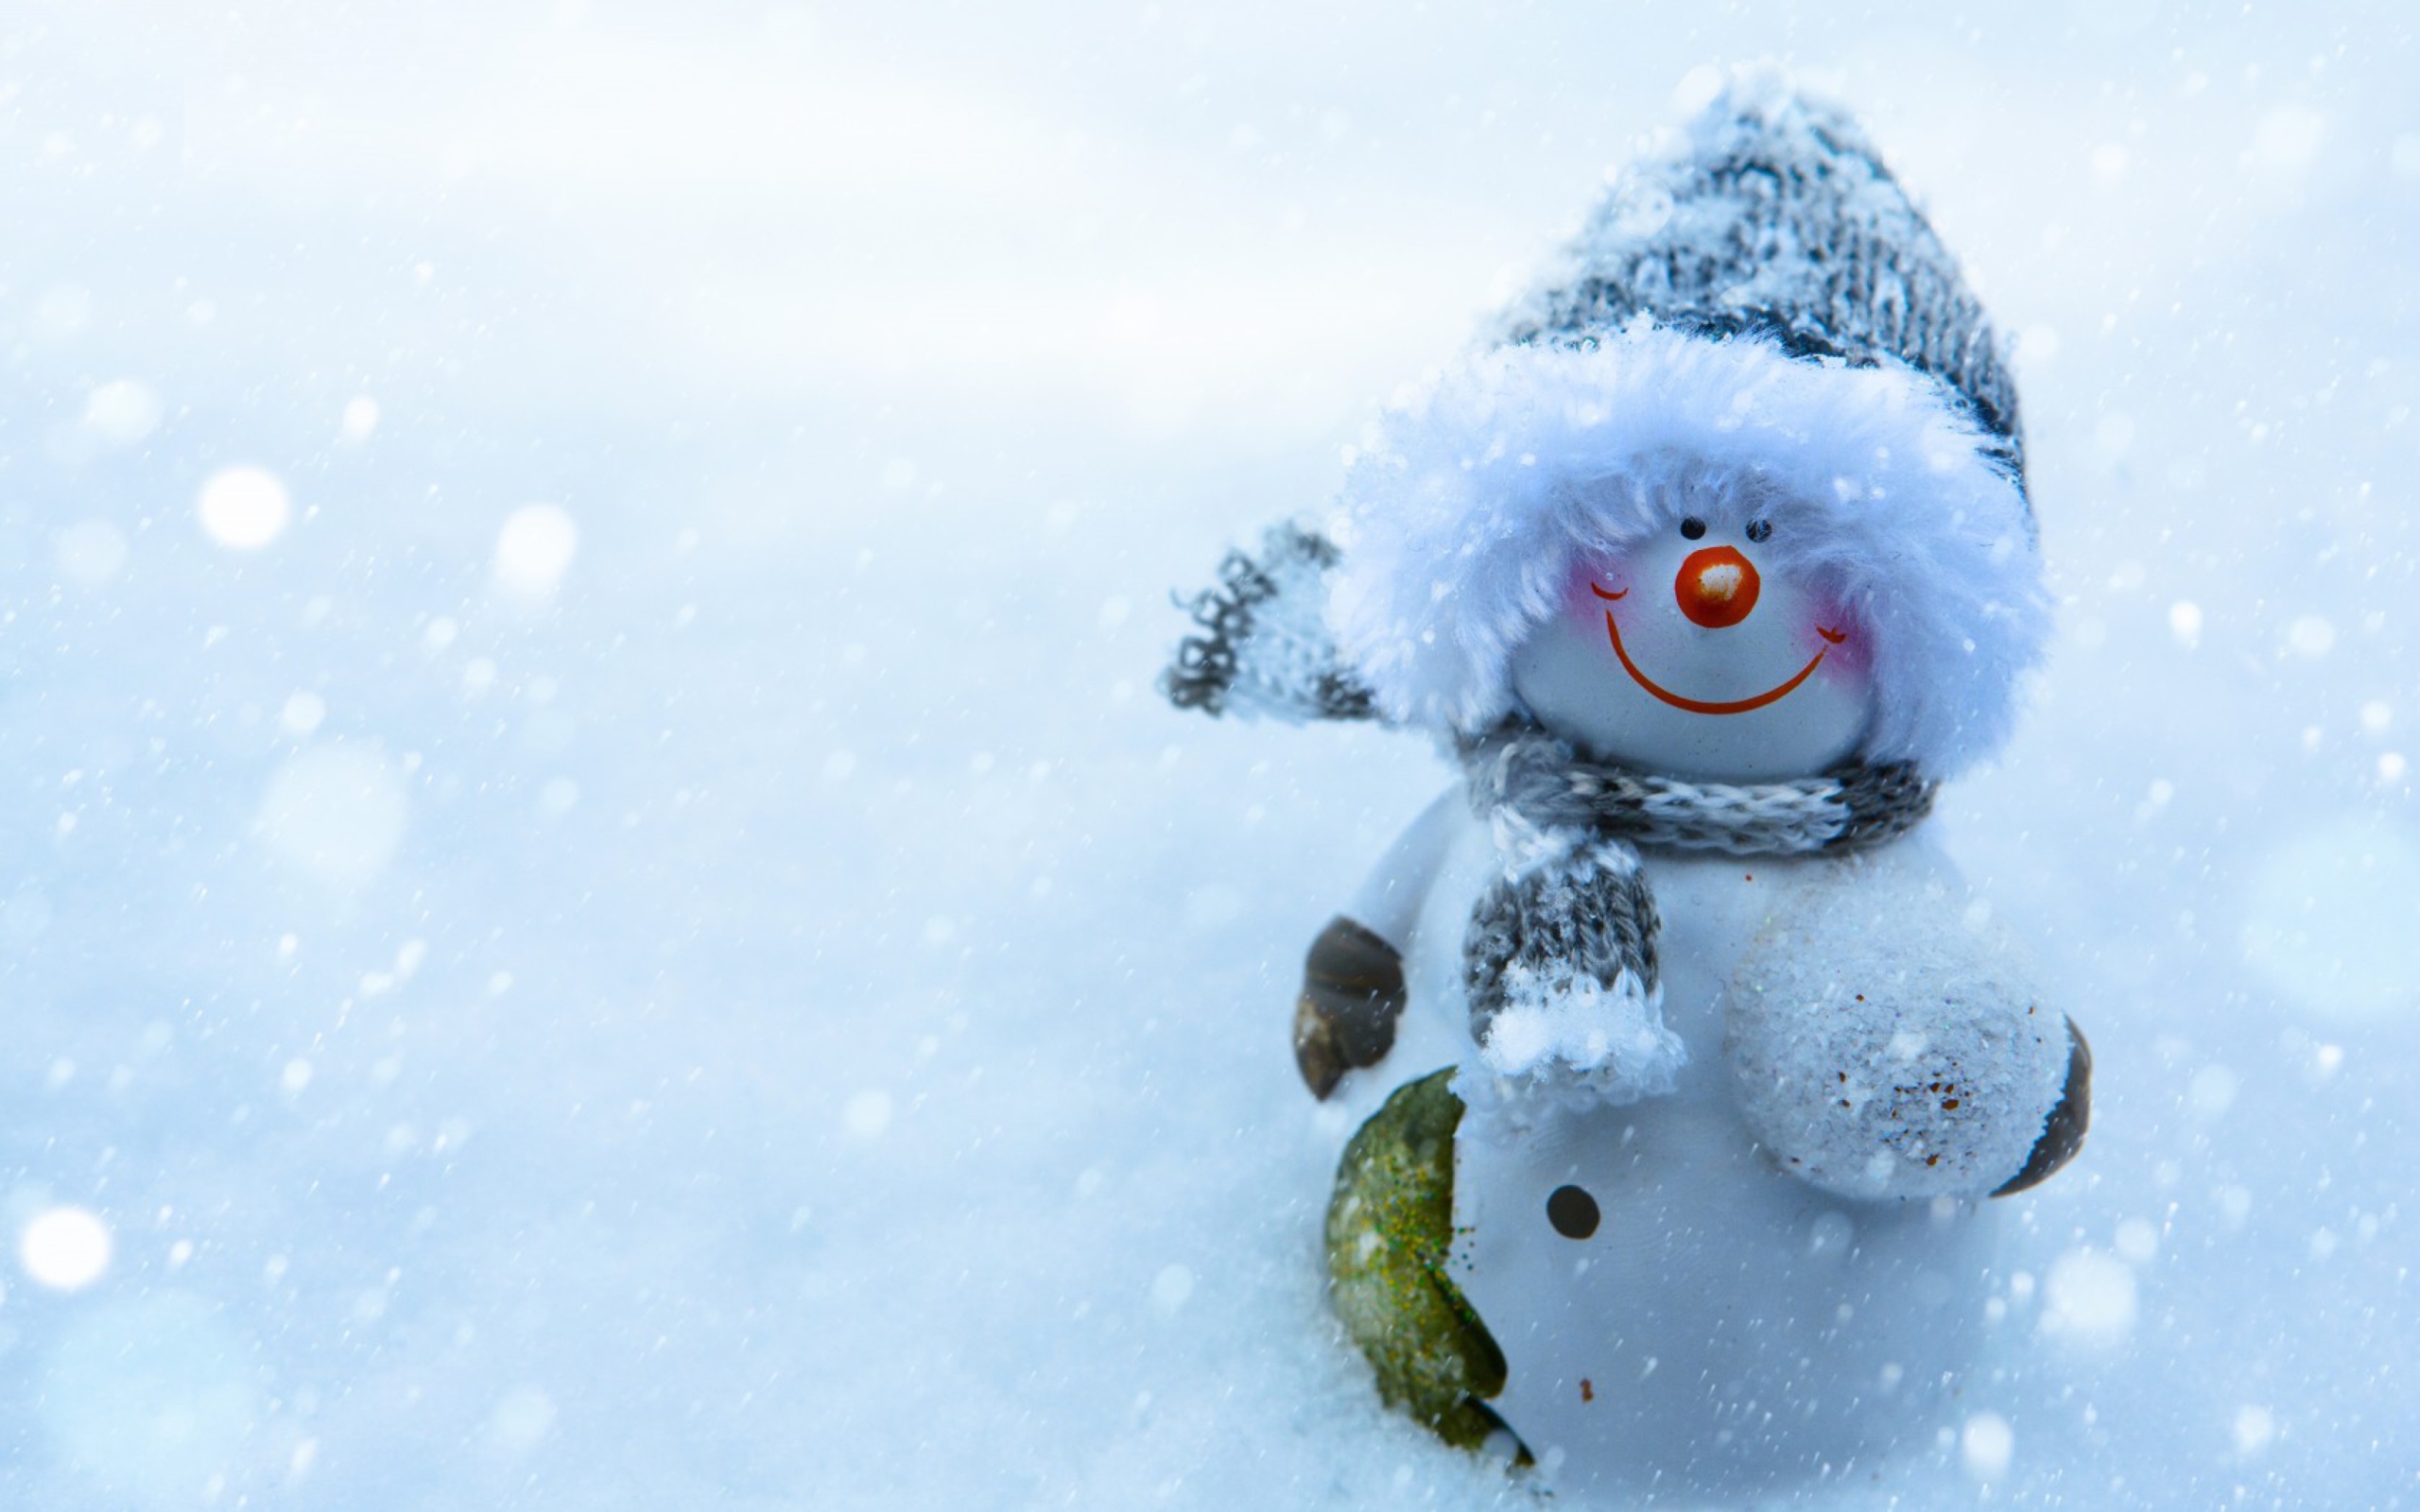 Snowman Covered With Snowflakes wallpaper 2560x1600